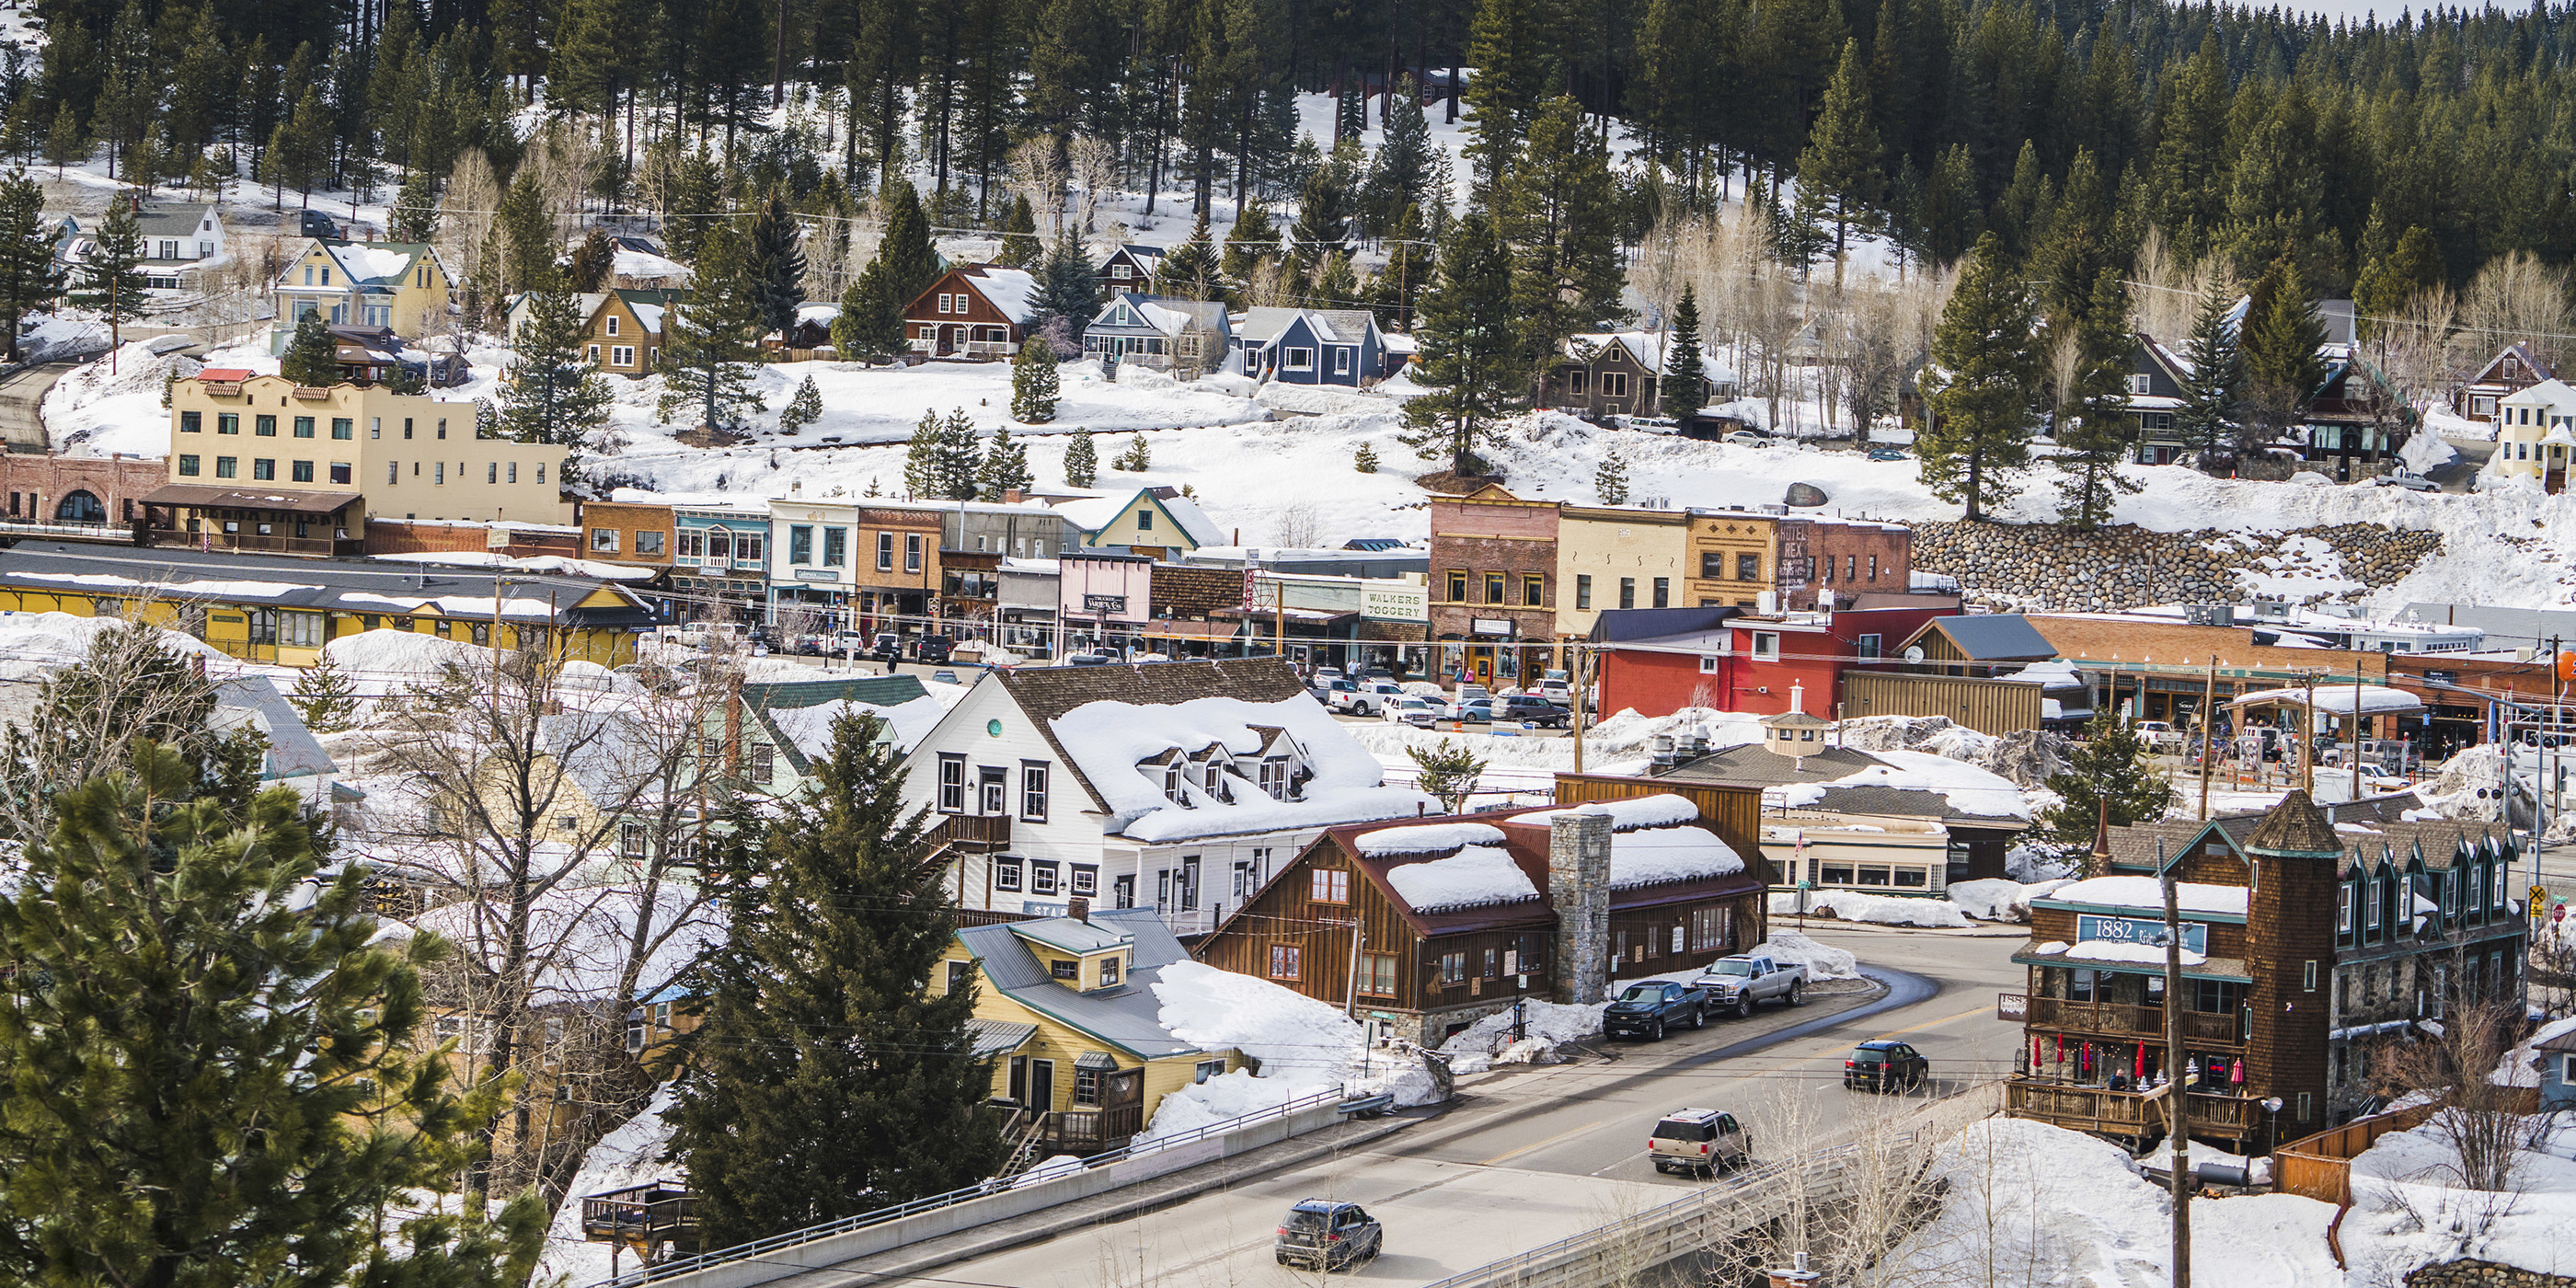 travel to truckee this weekend